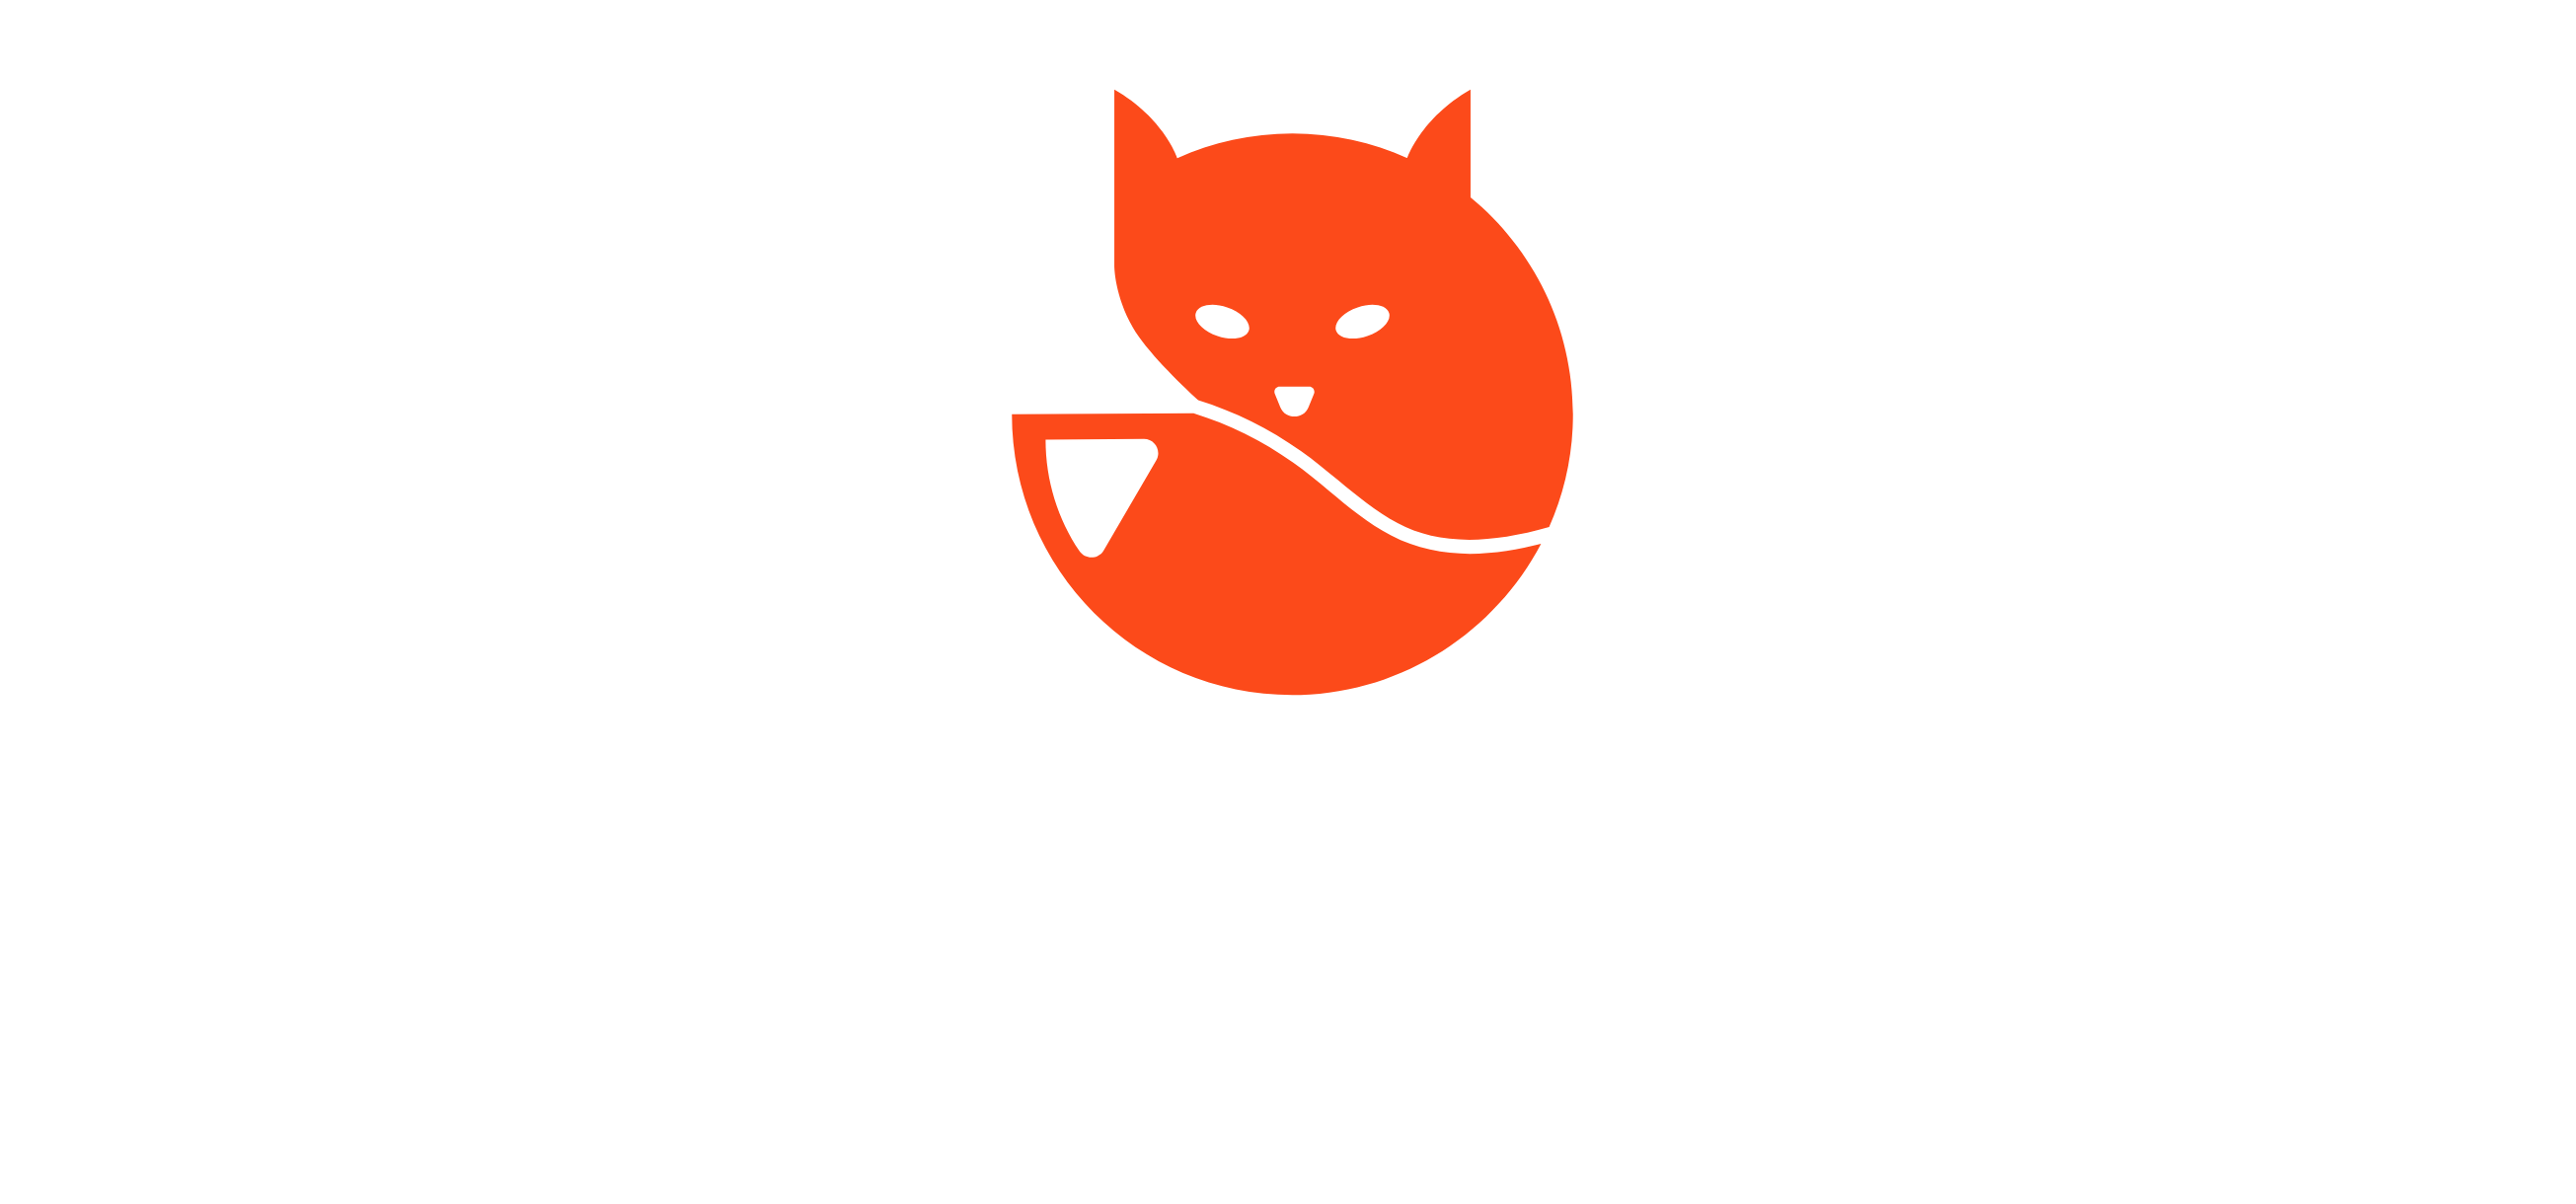 Collectic Logo 2